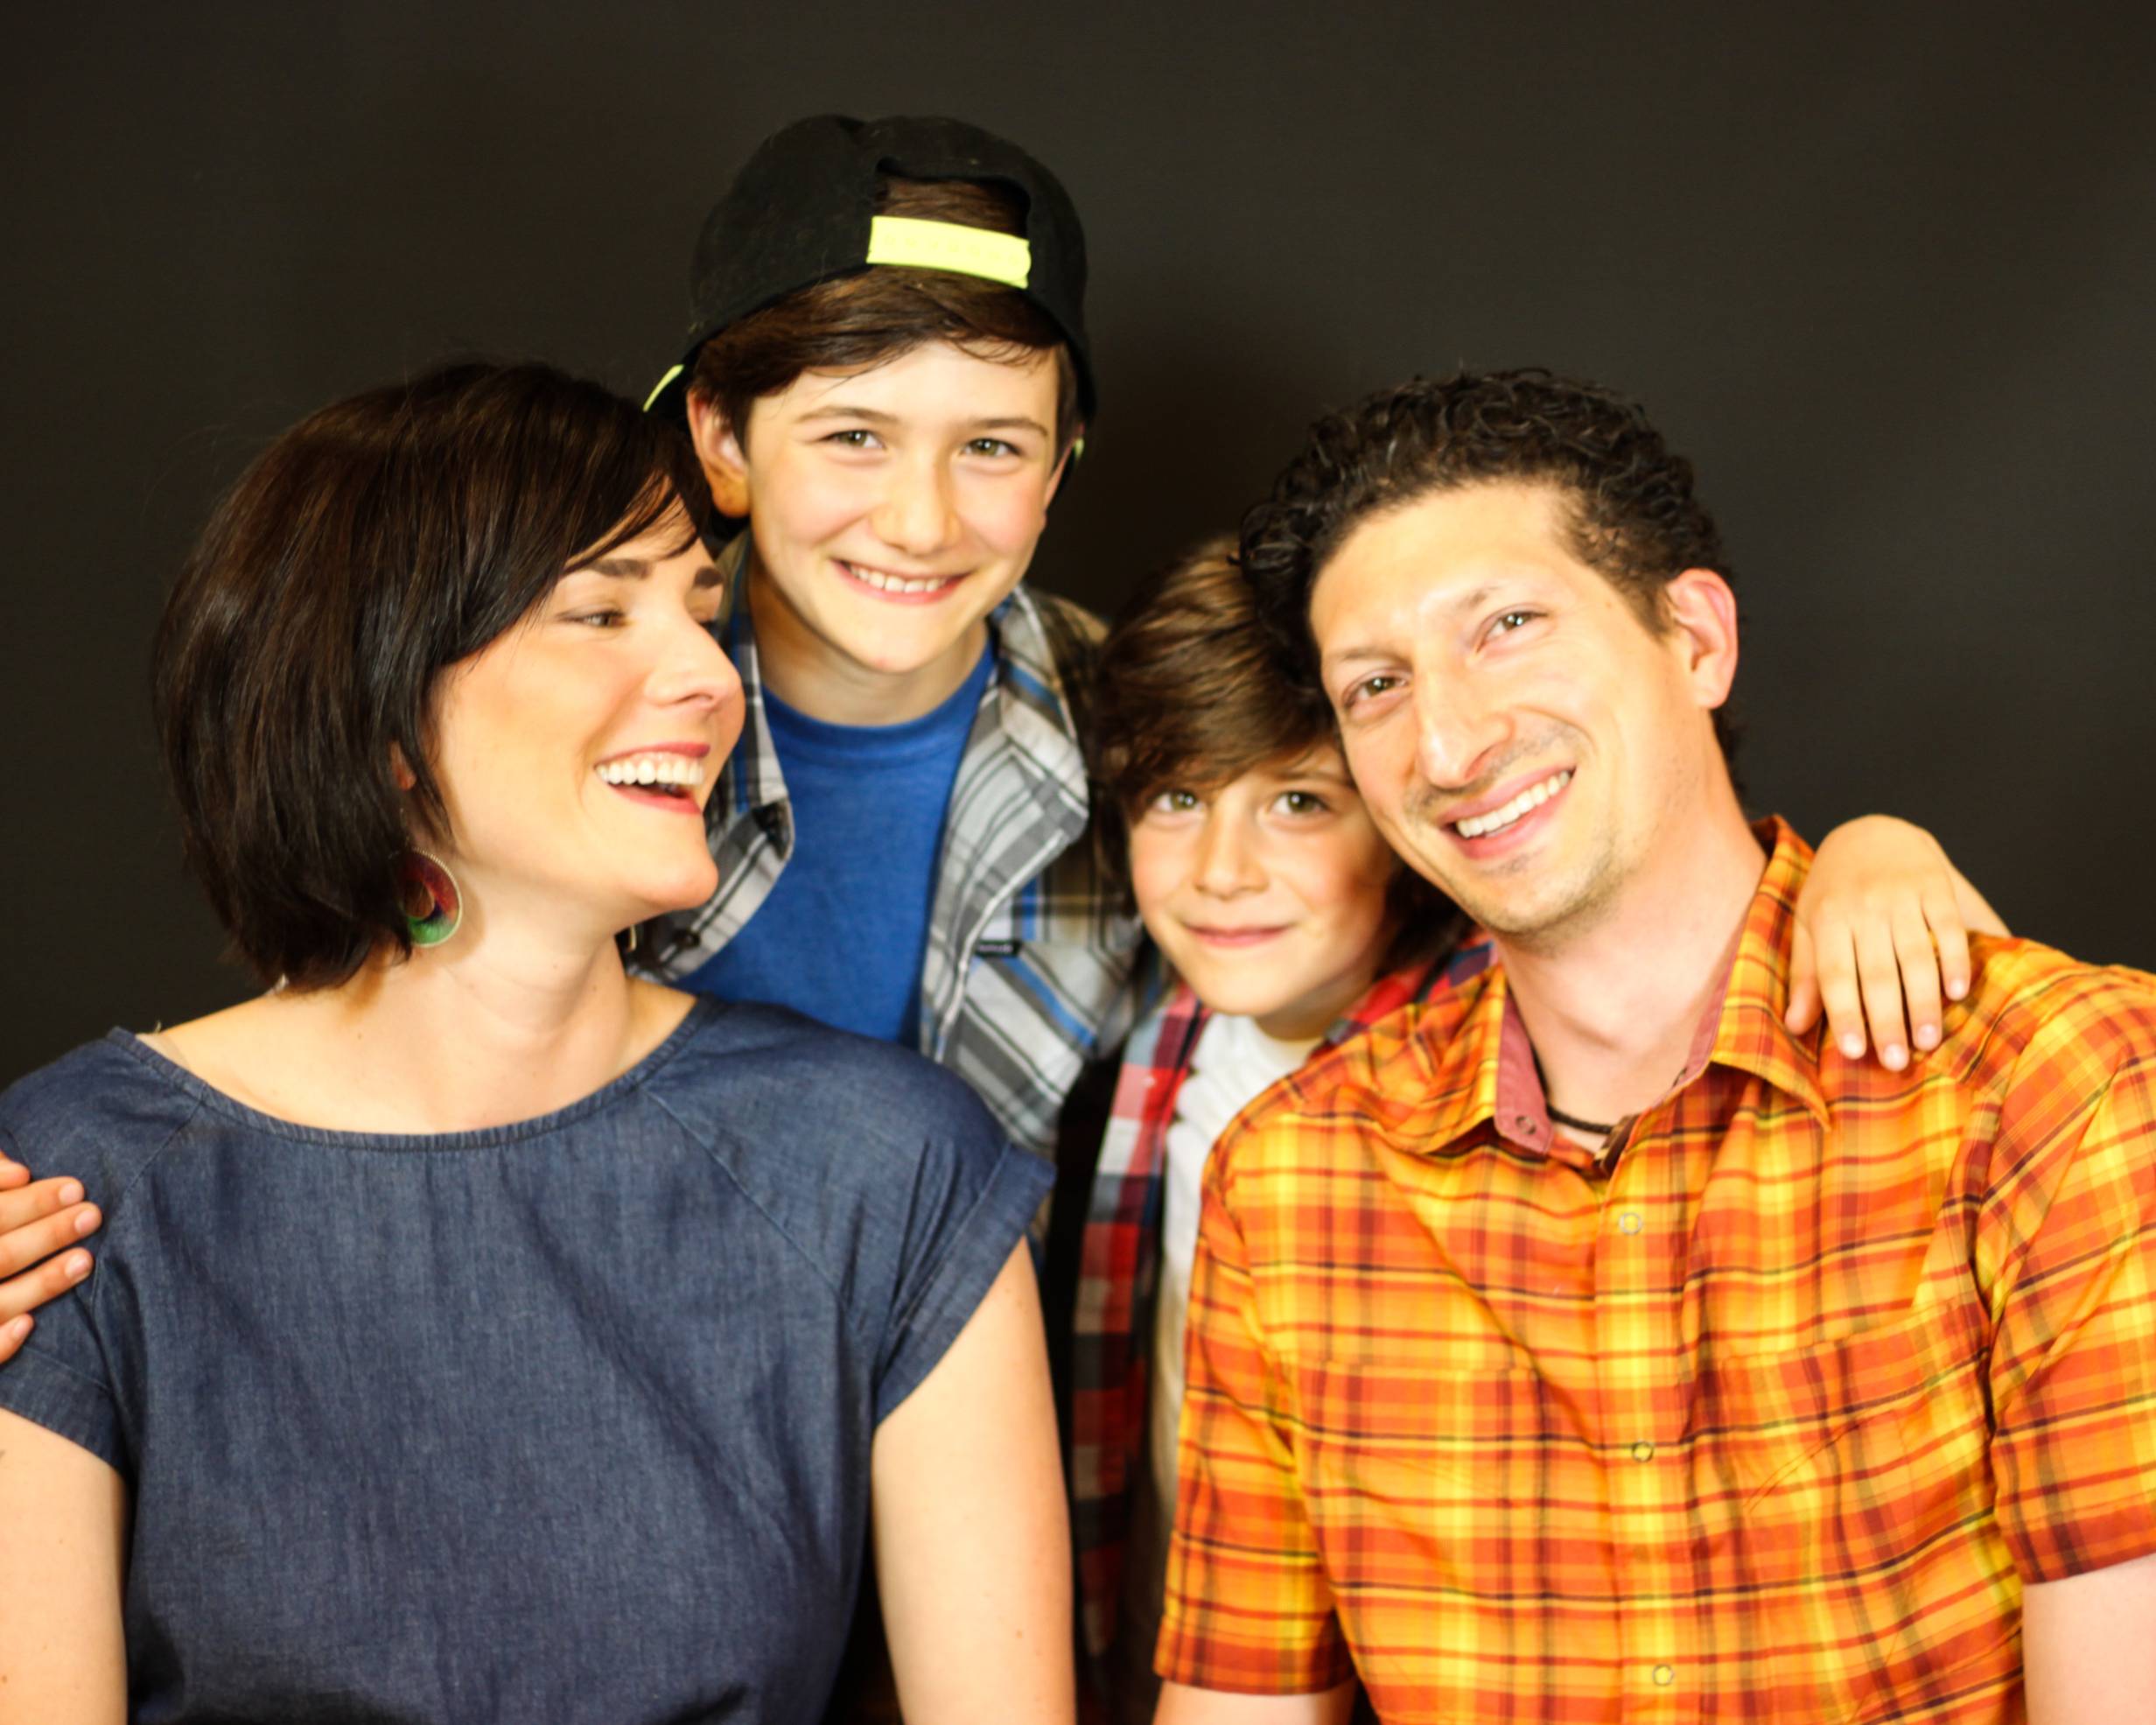 PBS features local family in Growing Up Trans